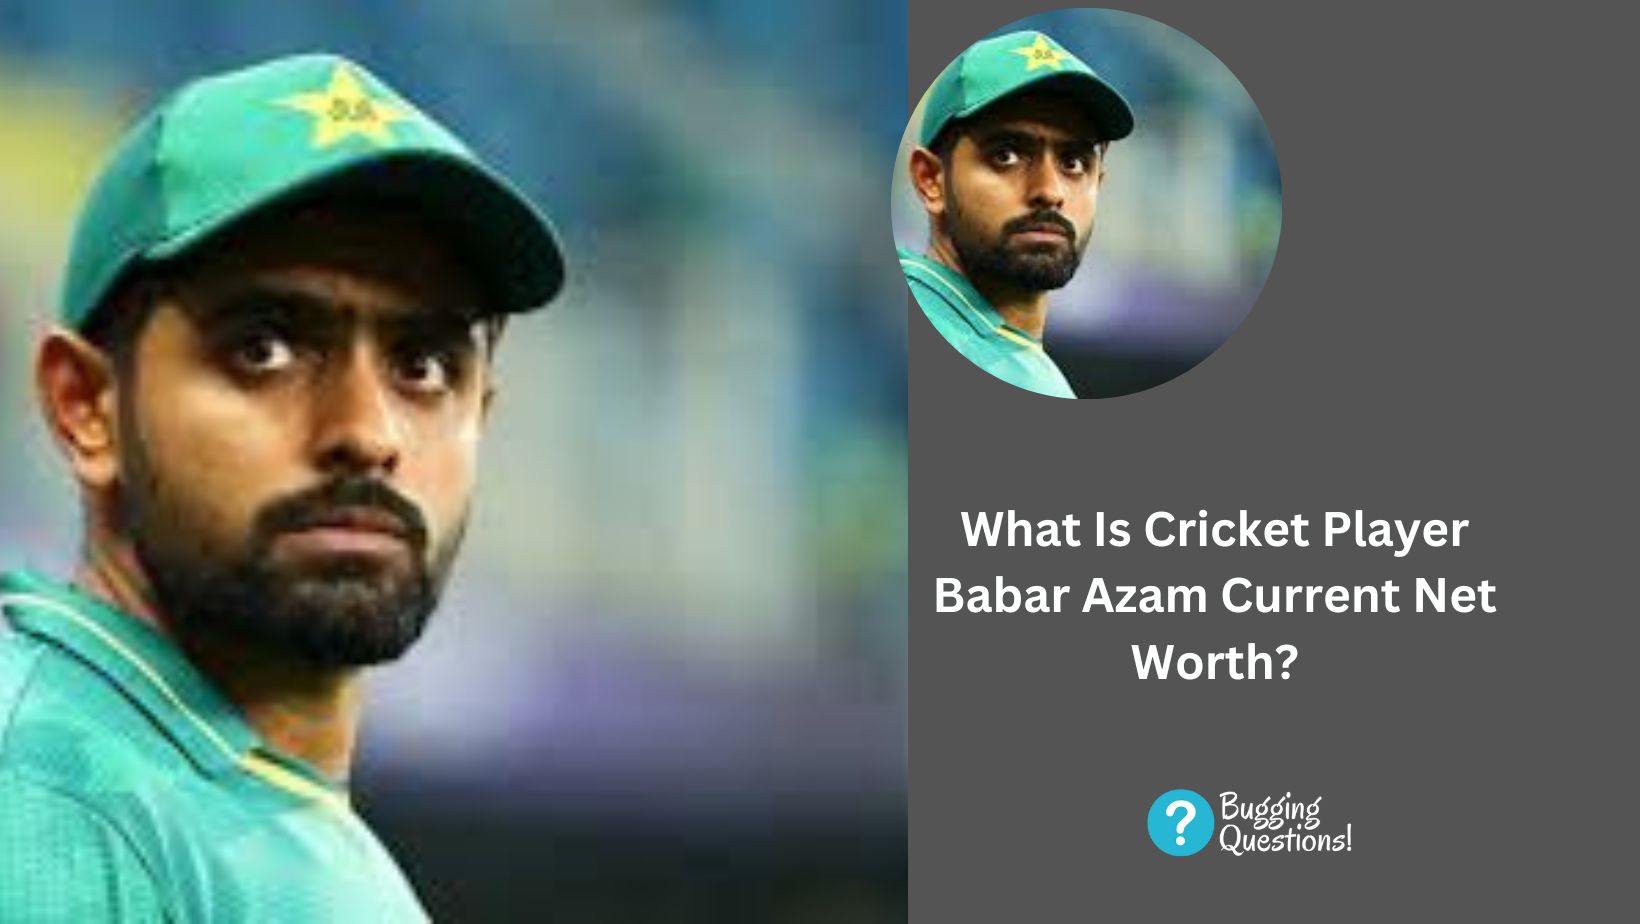 What Is Cricket Player Babar Azam Current Net Worth?